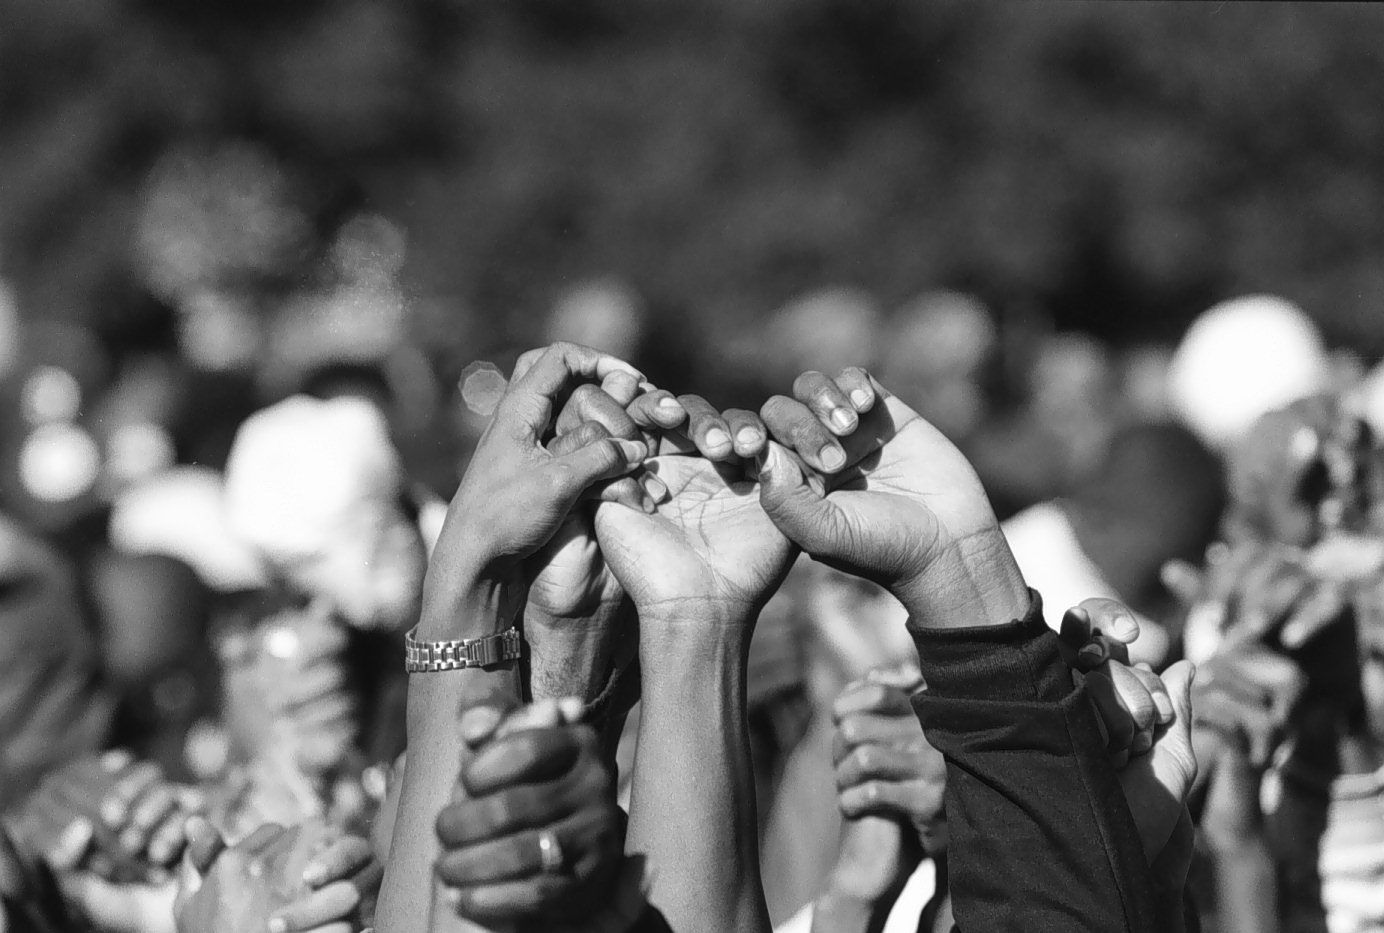 A Look Back: The 20th Anniversary of the Million Man March